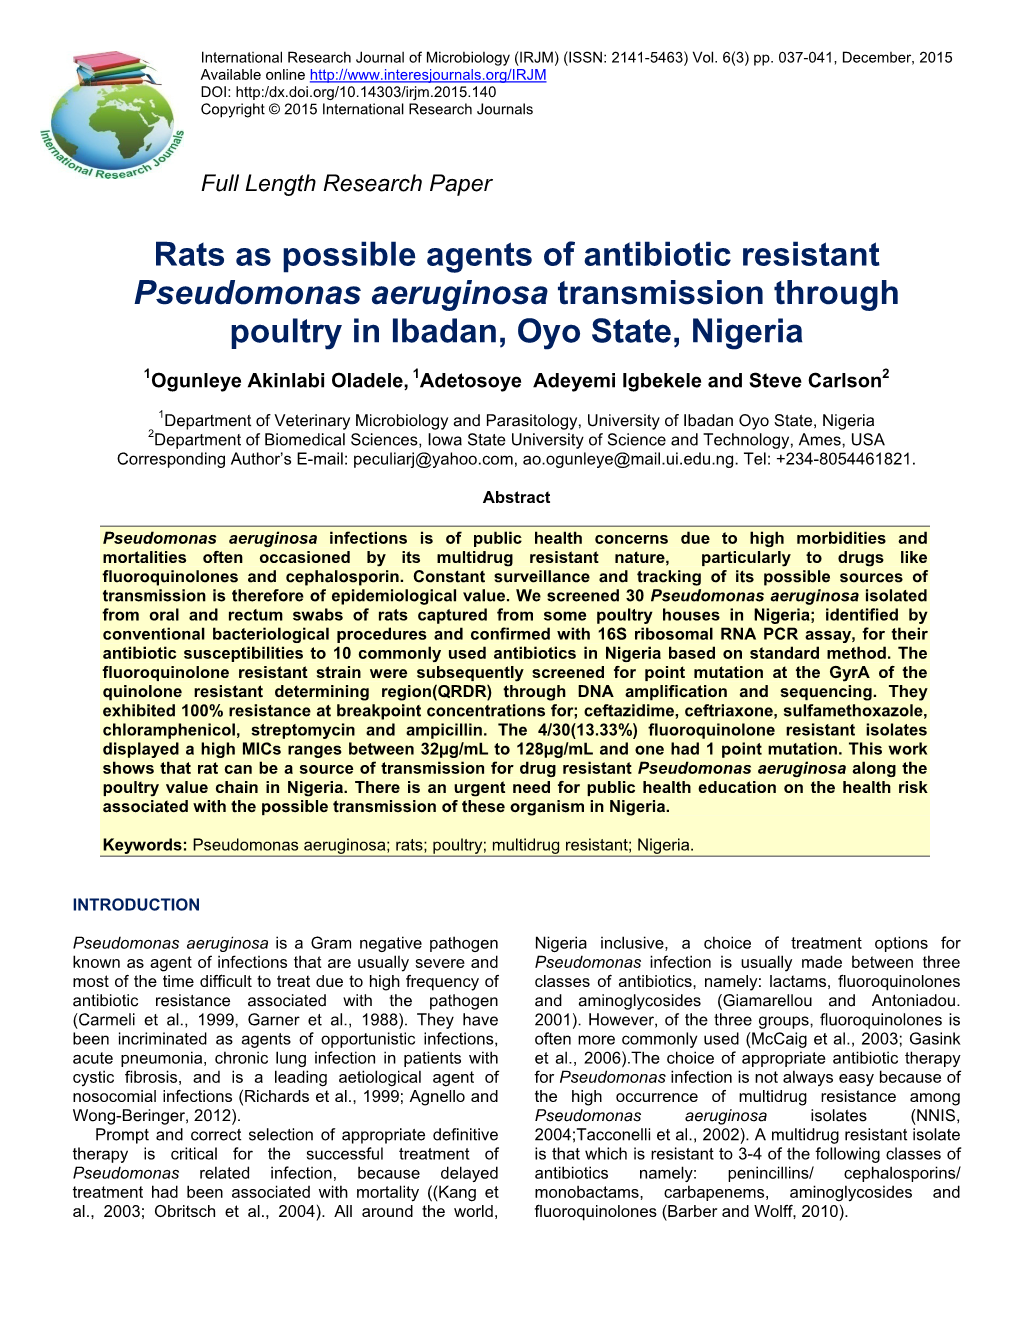 Rats As Possible Agents of Antibiotic Resistant Pseudomonas Aeruginosa Transmission Through Poultry in Ibadan, Oyo State, Nigeria